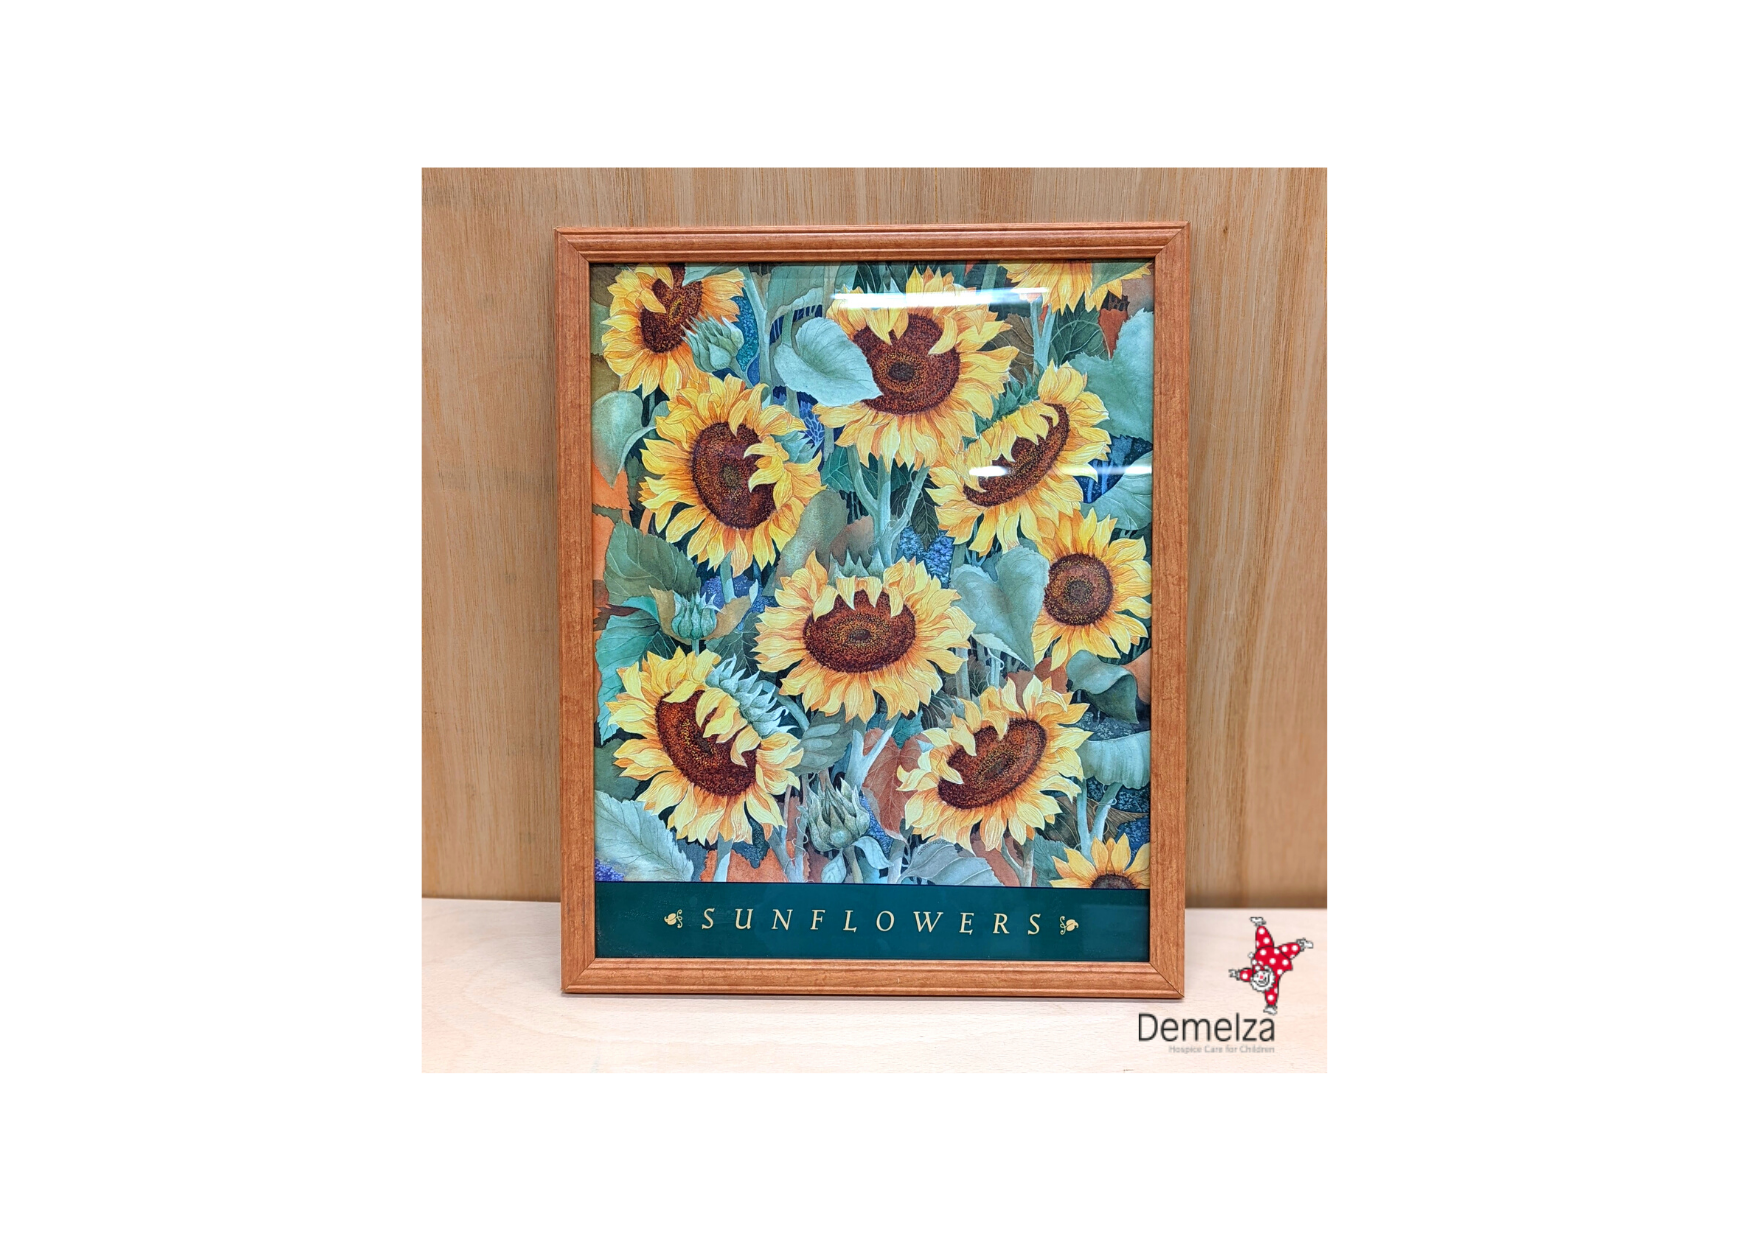 Sunflowers Poster Print in Brown Wooden Frame